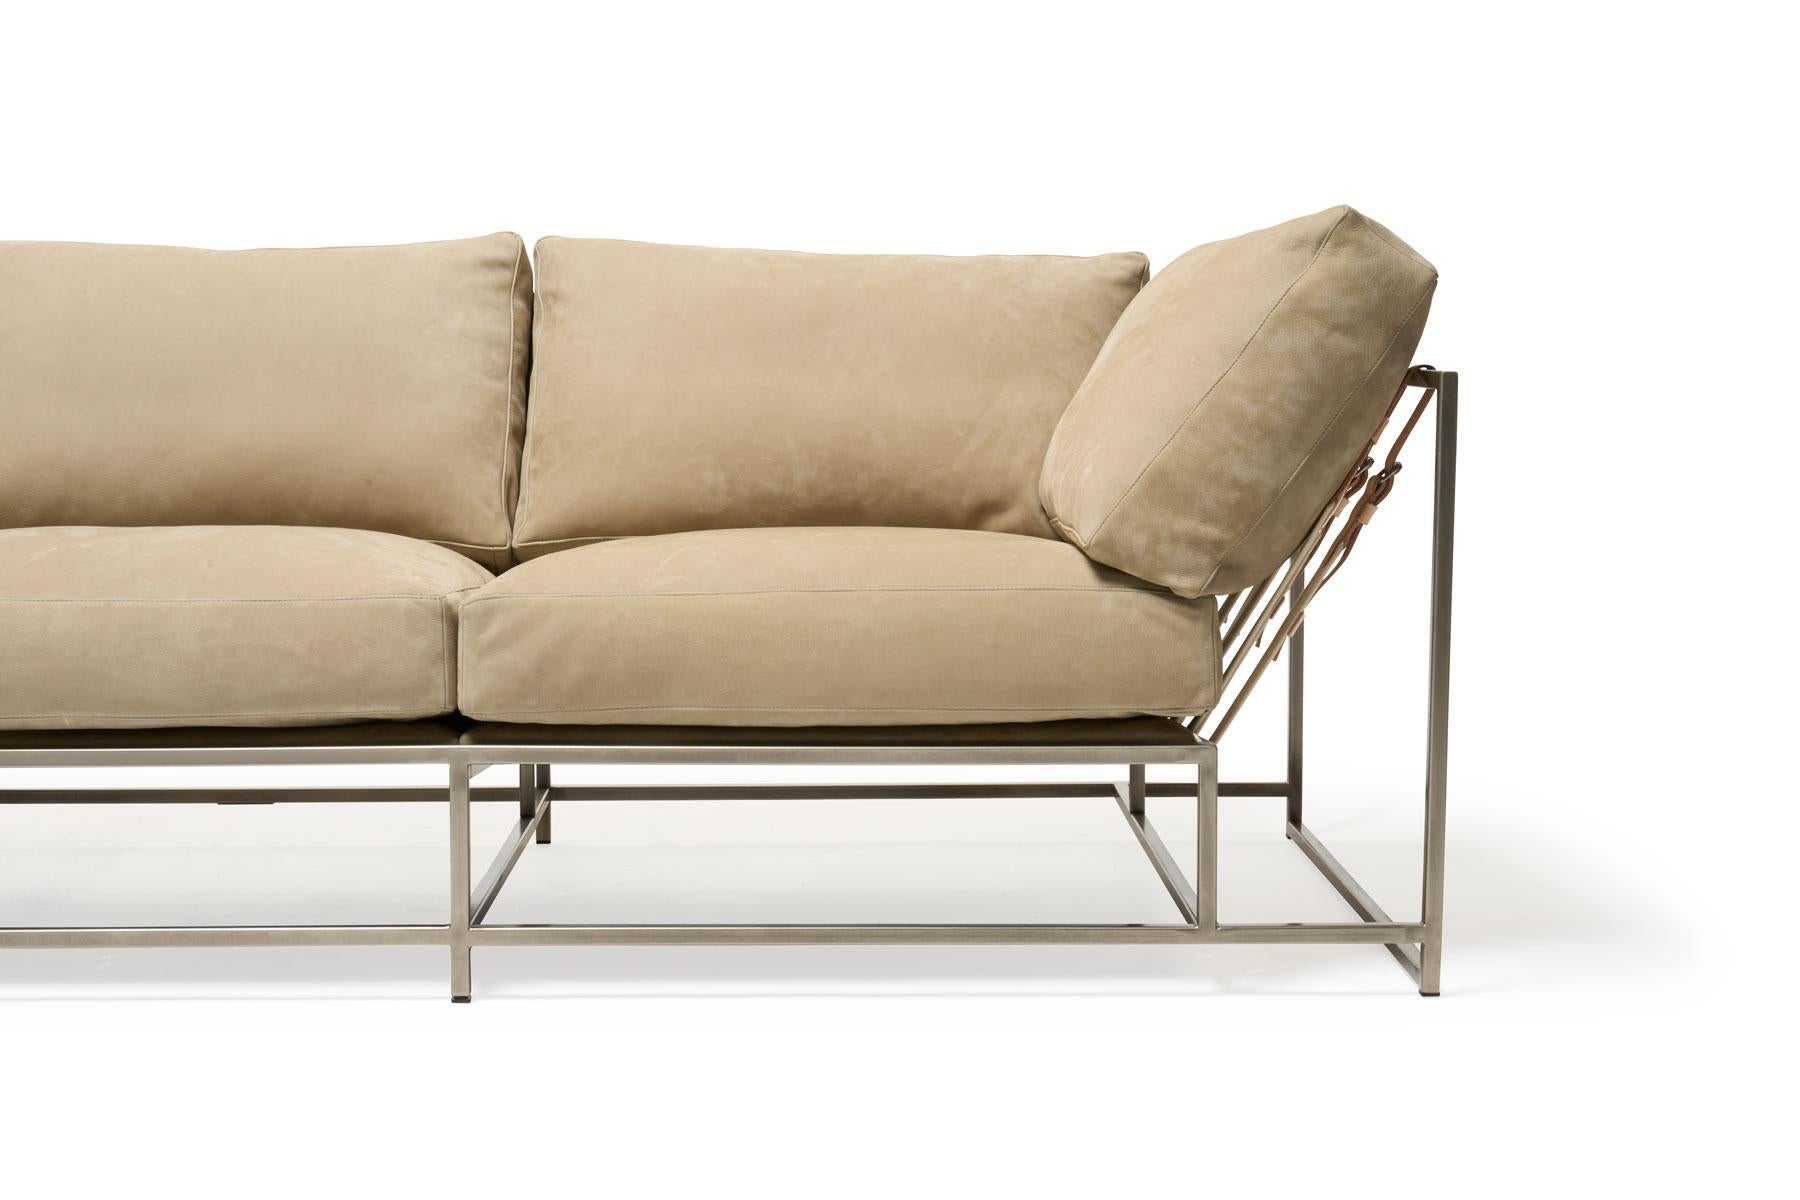 Metalwork Natural Nubuck Leather and Antique Nickel Sofa For Sale